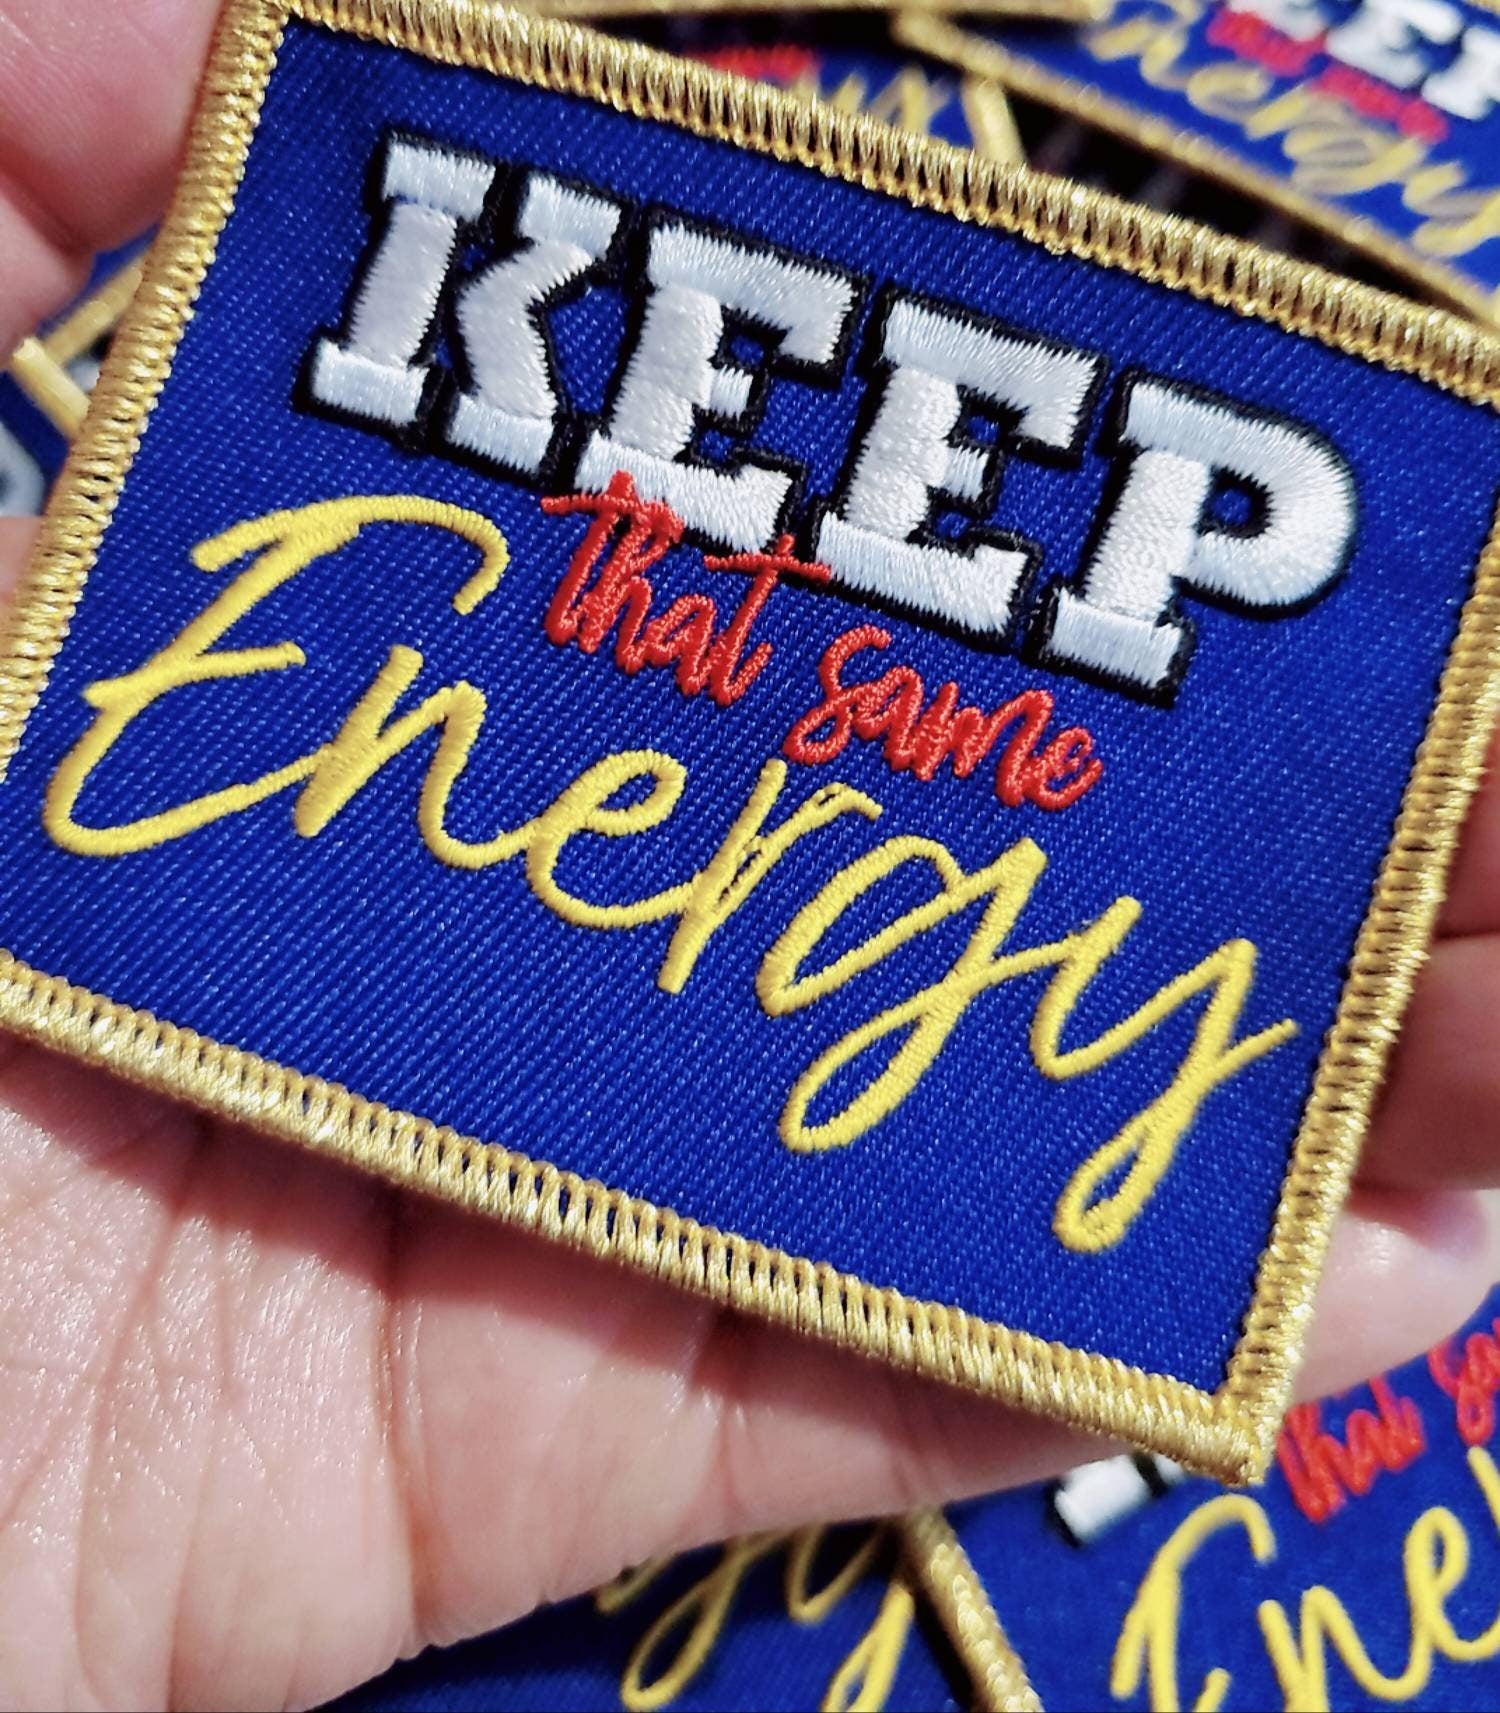 Metallic Gold, Exclusive "Keep That Same Energy," Size 3.5"x3", Iron-on Patch,Applique for Clothing, Girl Boss Patch for Hats, and Jackets